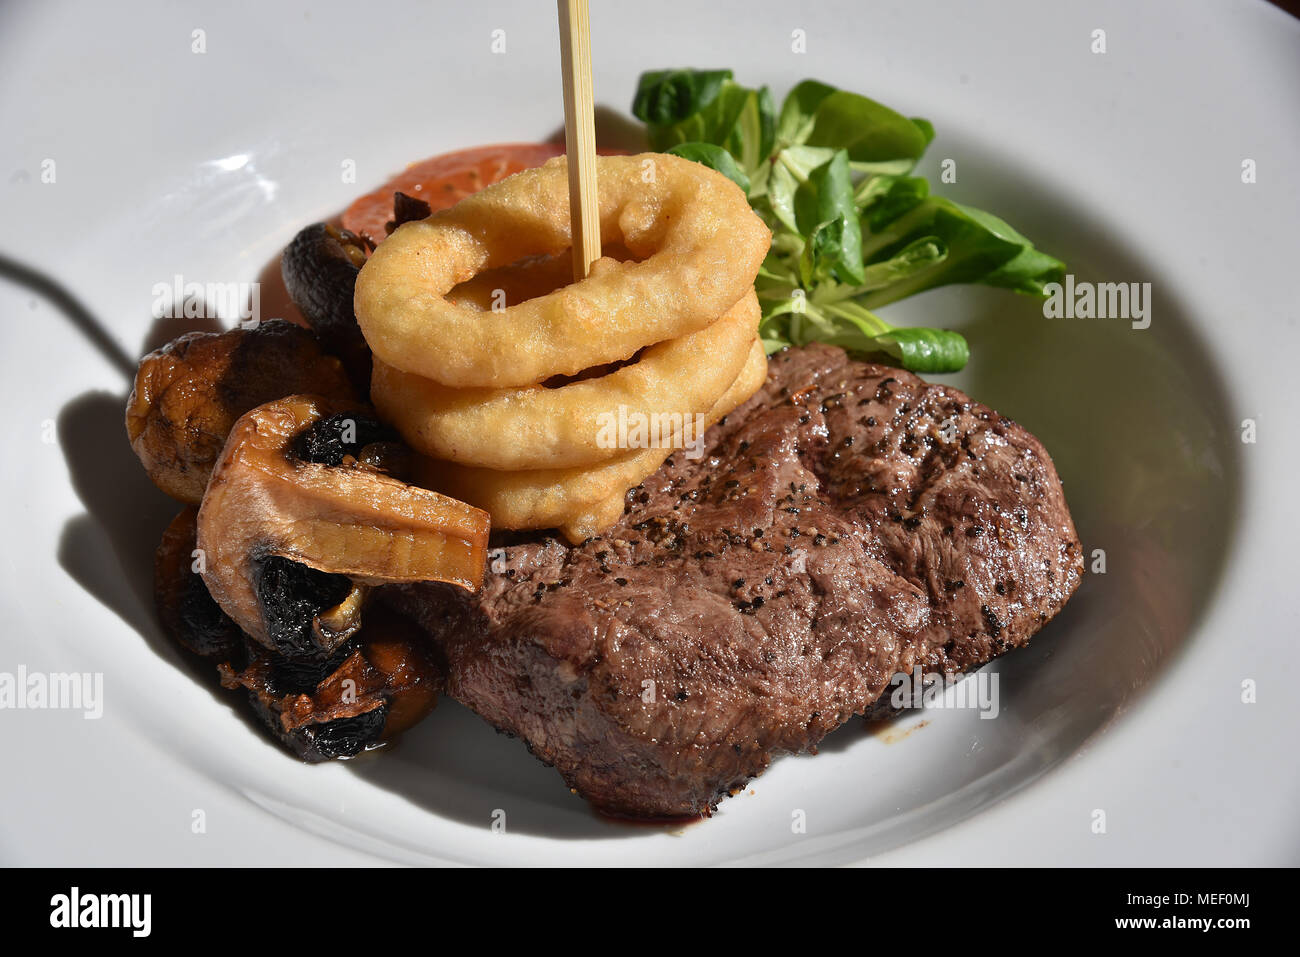 Pictures show plated food, cheese burger with onion rings tomato and lettuce, a steak and mushroom meal and a bacon and chicken dish. Stock Photo